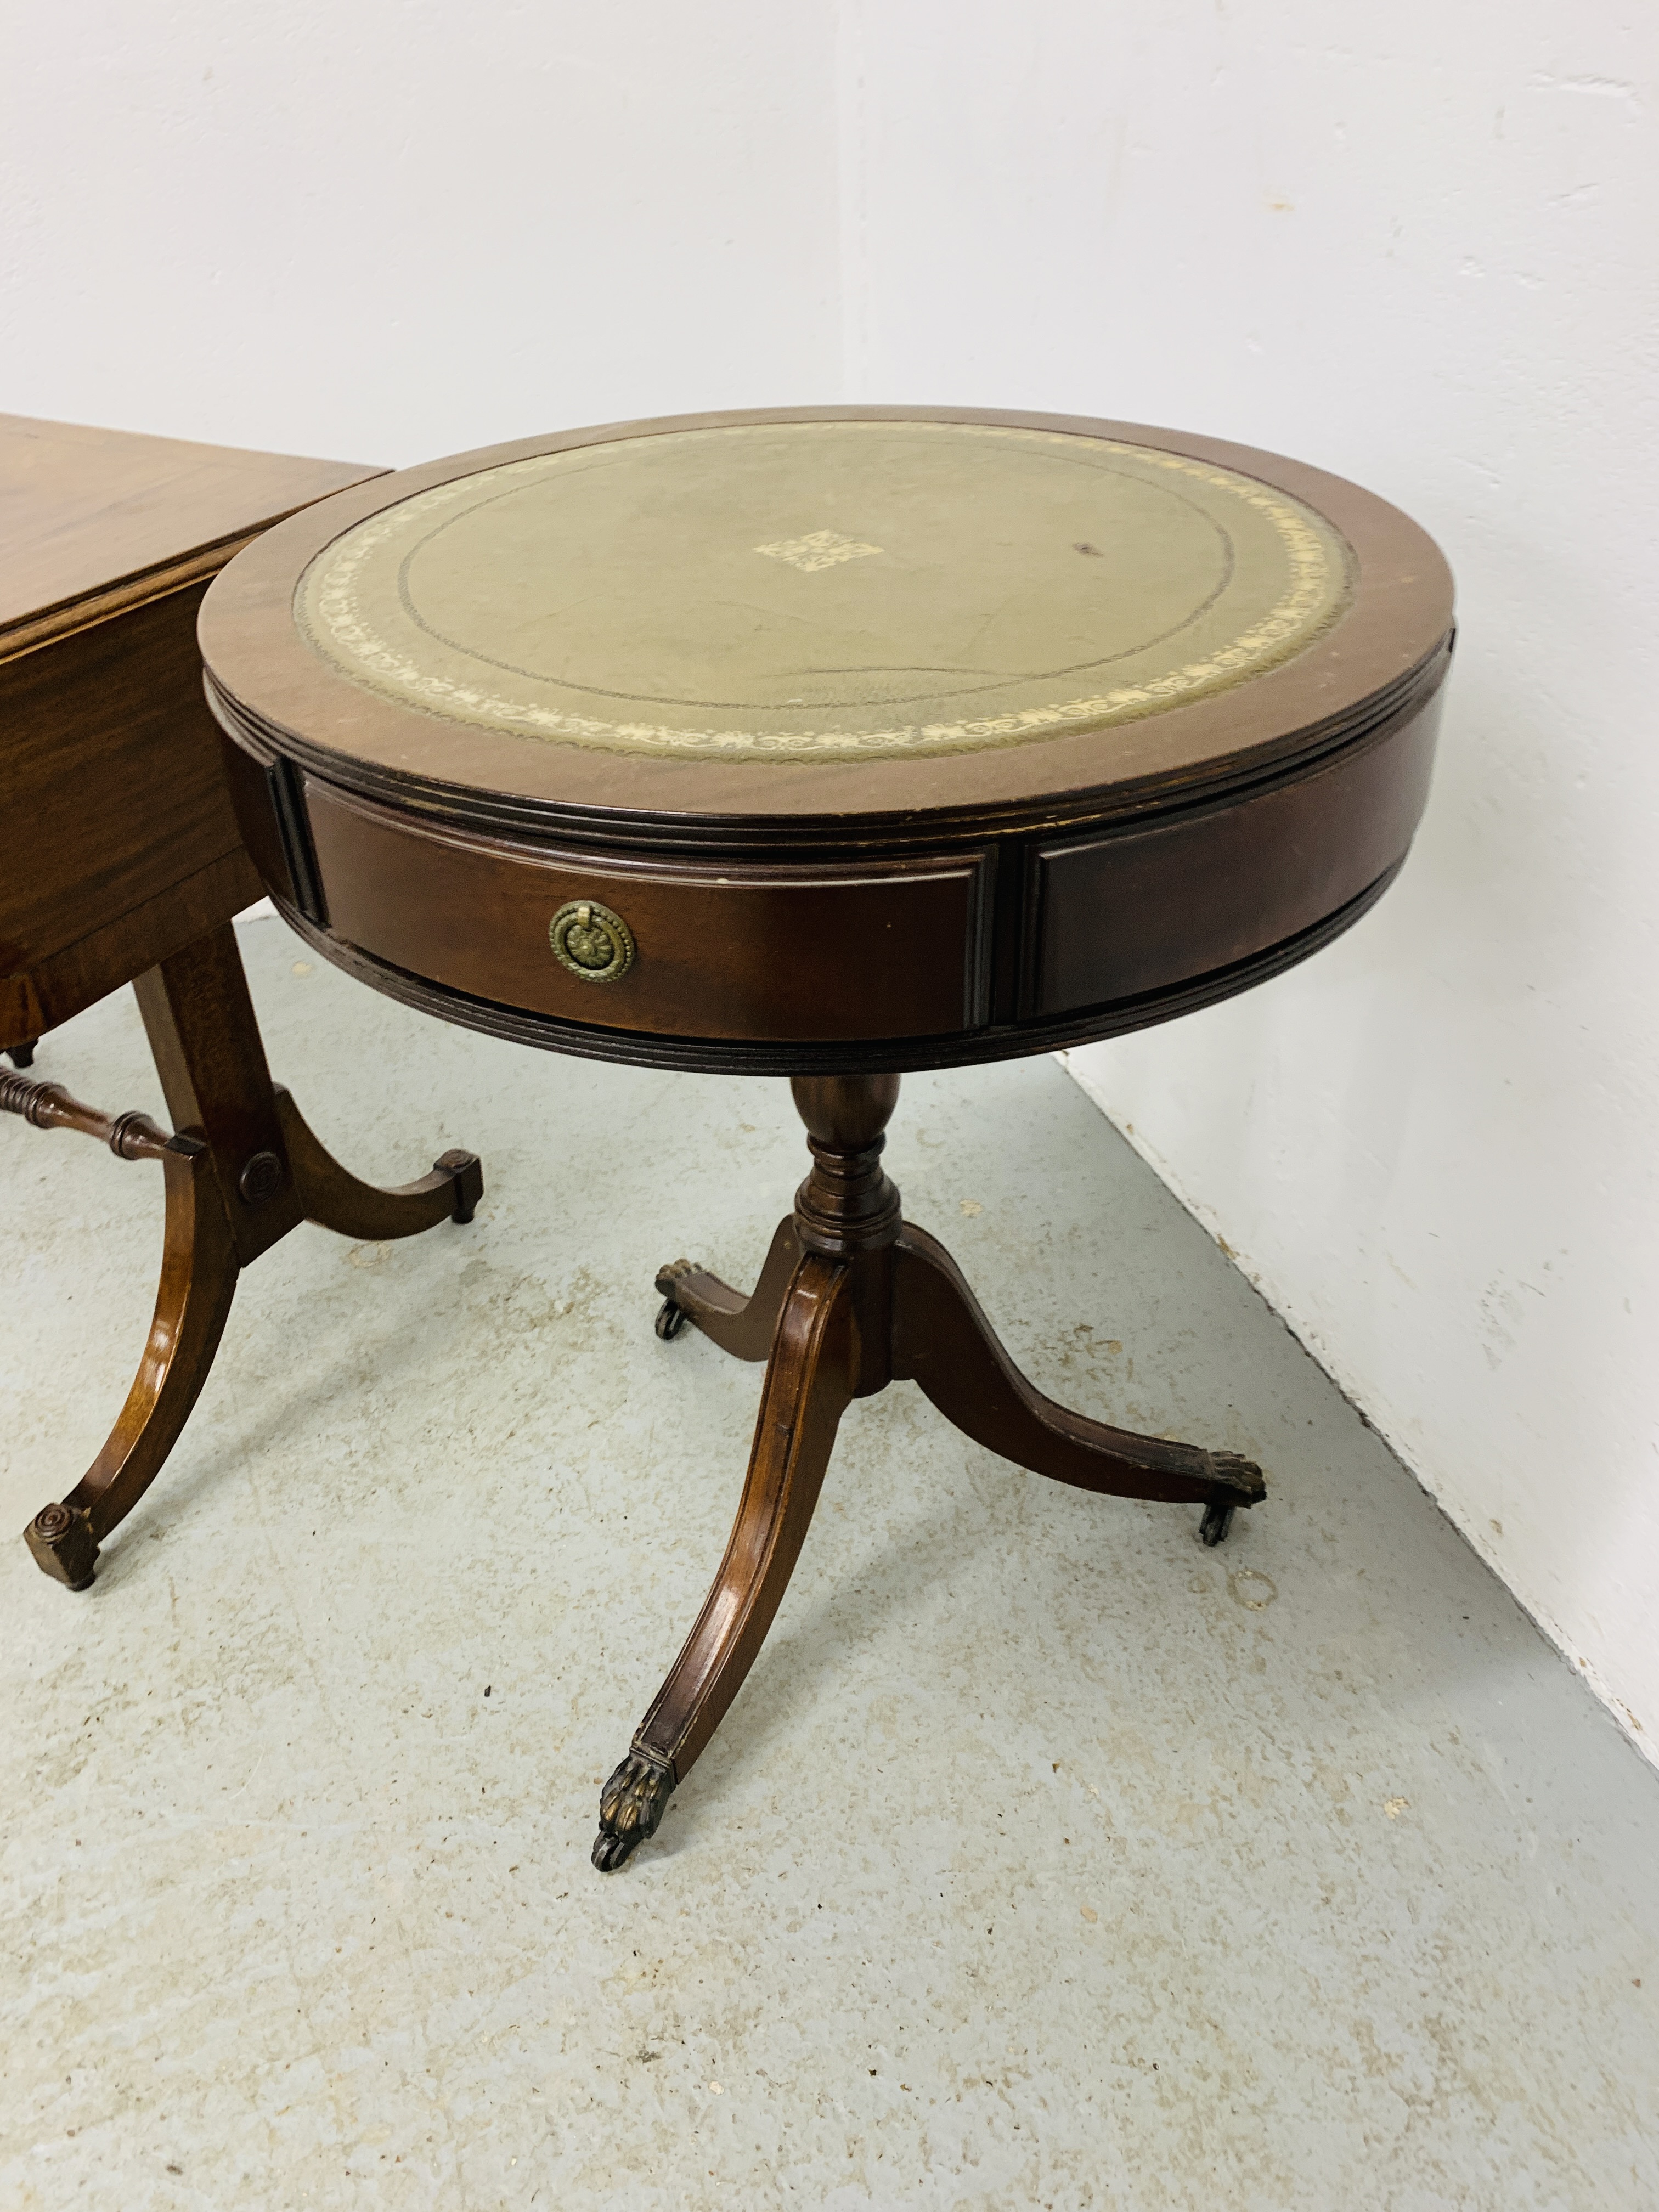 A REPRODUCTION DROP FLAP SINGLE DRAWER OCCASIONAL TABLE AND REPRODUCTION MAHOGANY FINISH PEDESTAL - Image 2 of 9